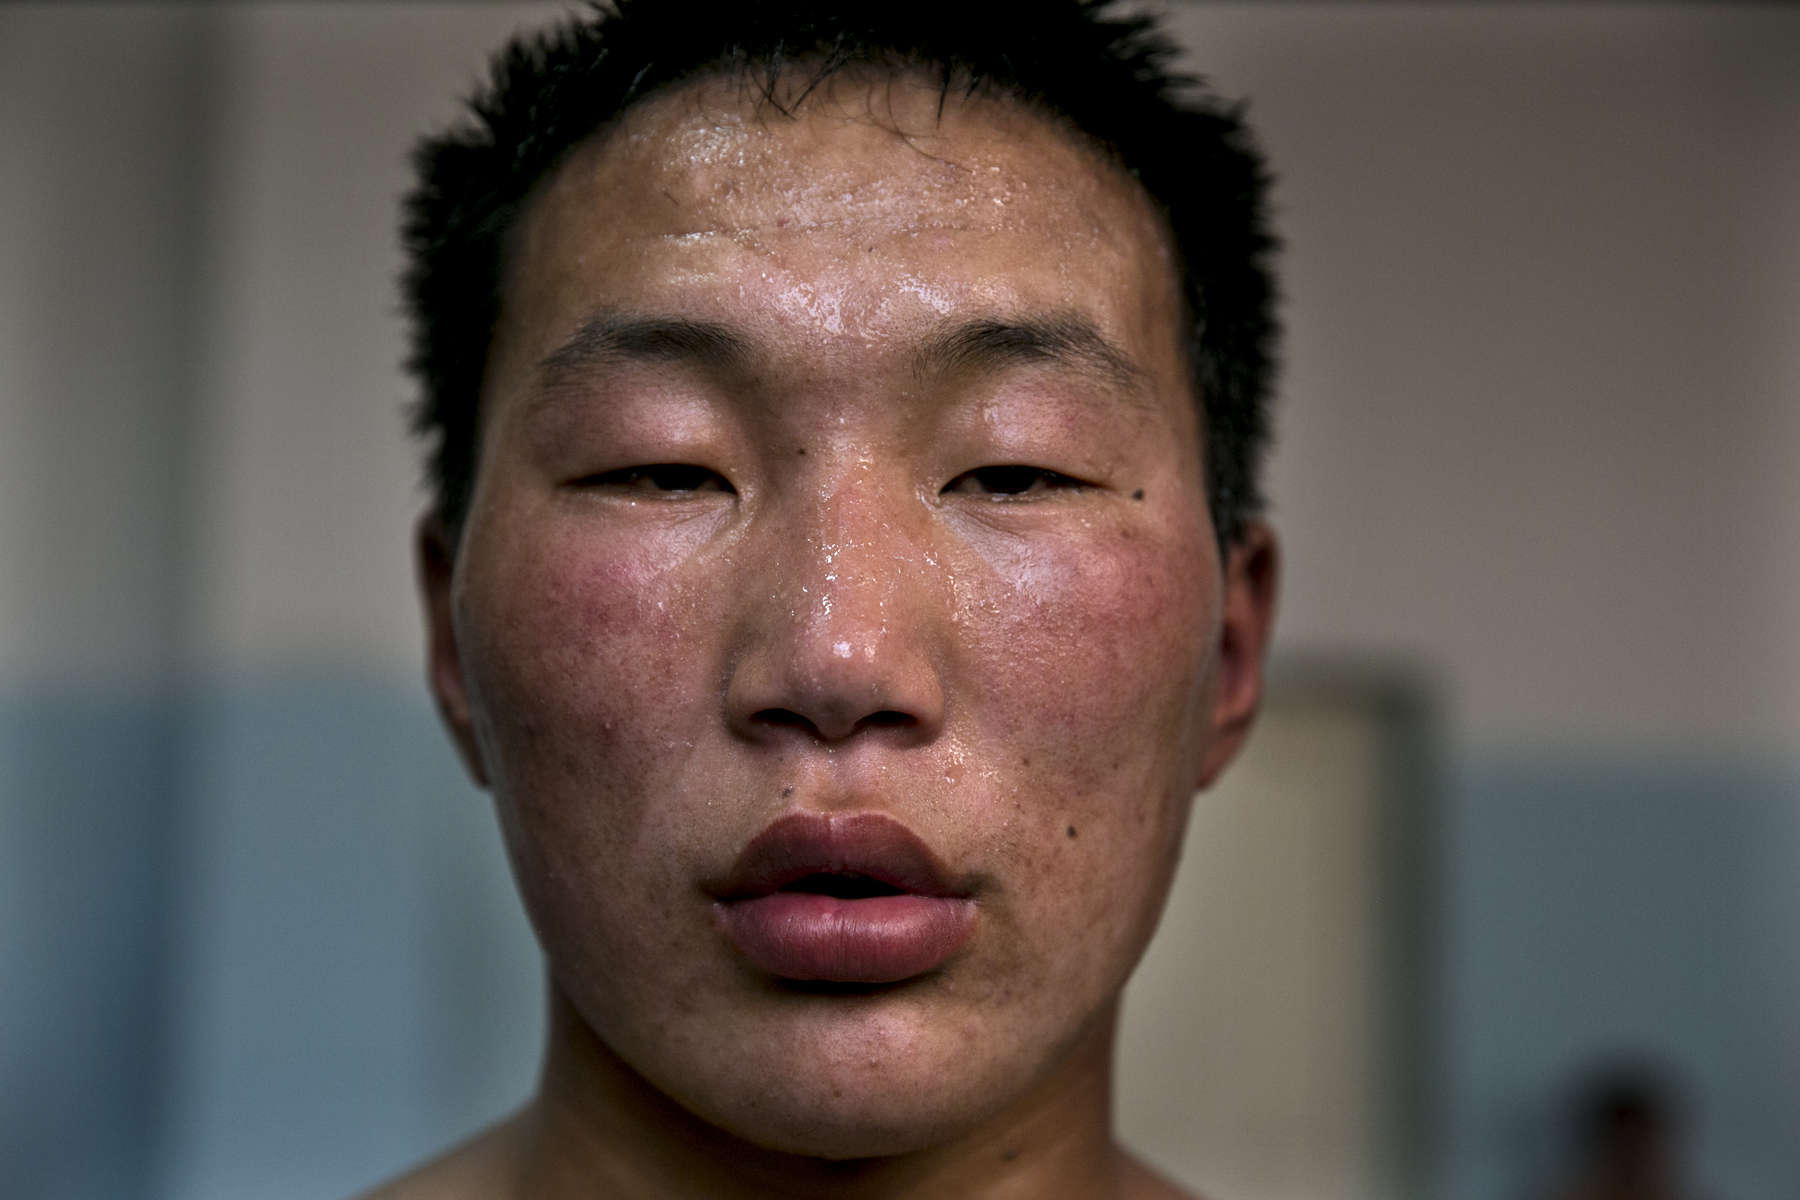 A Mongolian wrestler looks into a camera during a break in wrestling practice. Mongolia is the most sparsely populated country on earth, but its people are some of the strongest. In Mongolia, wrestling is the most important sport that runs deep into its culture along with horsemanship and archery. Going back for hundreds of years, history books tell the story of how Genghis Khan considered wrestling to be an important way to keep his army combat ready while back in the Qing Dynasty (1646–1911) regular wrestling events were held. In Mongolia’s capitol city, Ulan Batar is home to many wrestling schools where almost daily you can see dozens of young men sweating in crowded gyms while in schools both girls and boys are taught some wrestling techniques.While my photo story gives a real behind the scenes look, it is unusual for a woman to document this macho scene of sweat and endurance.